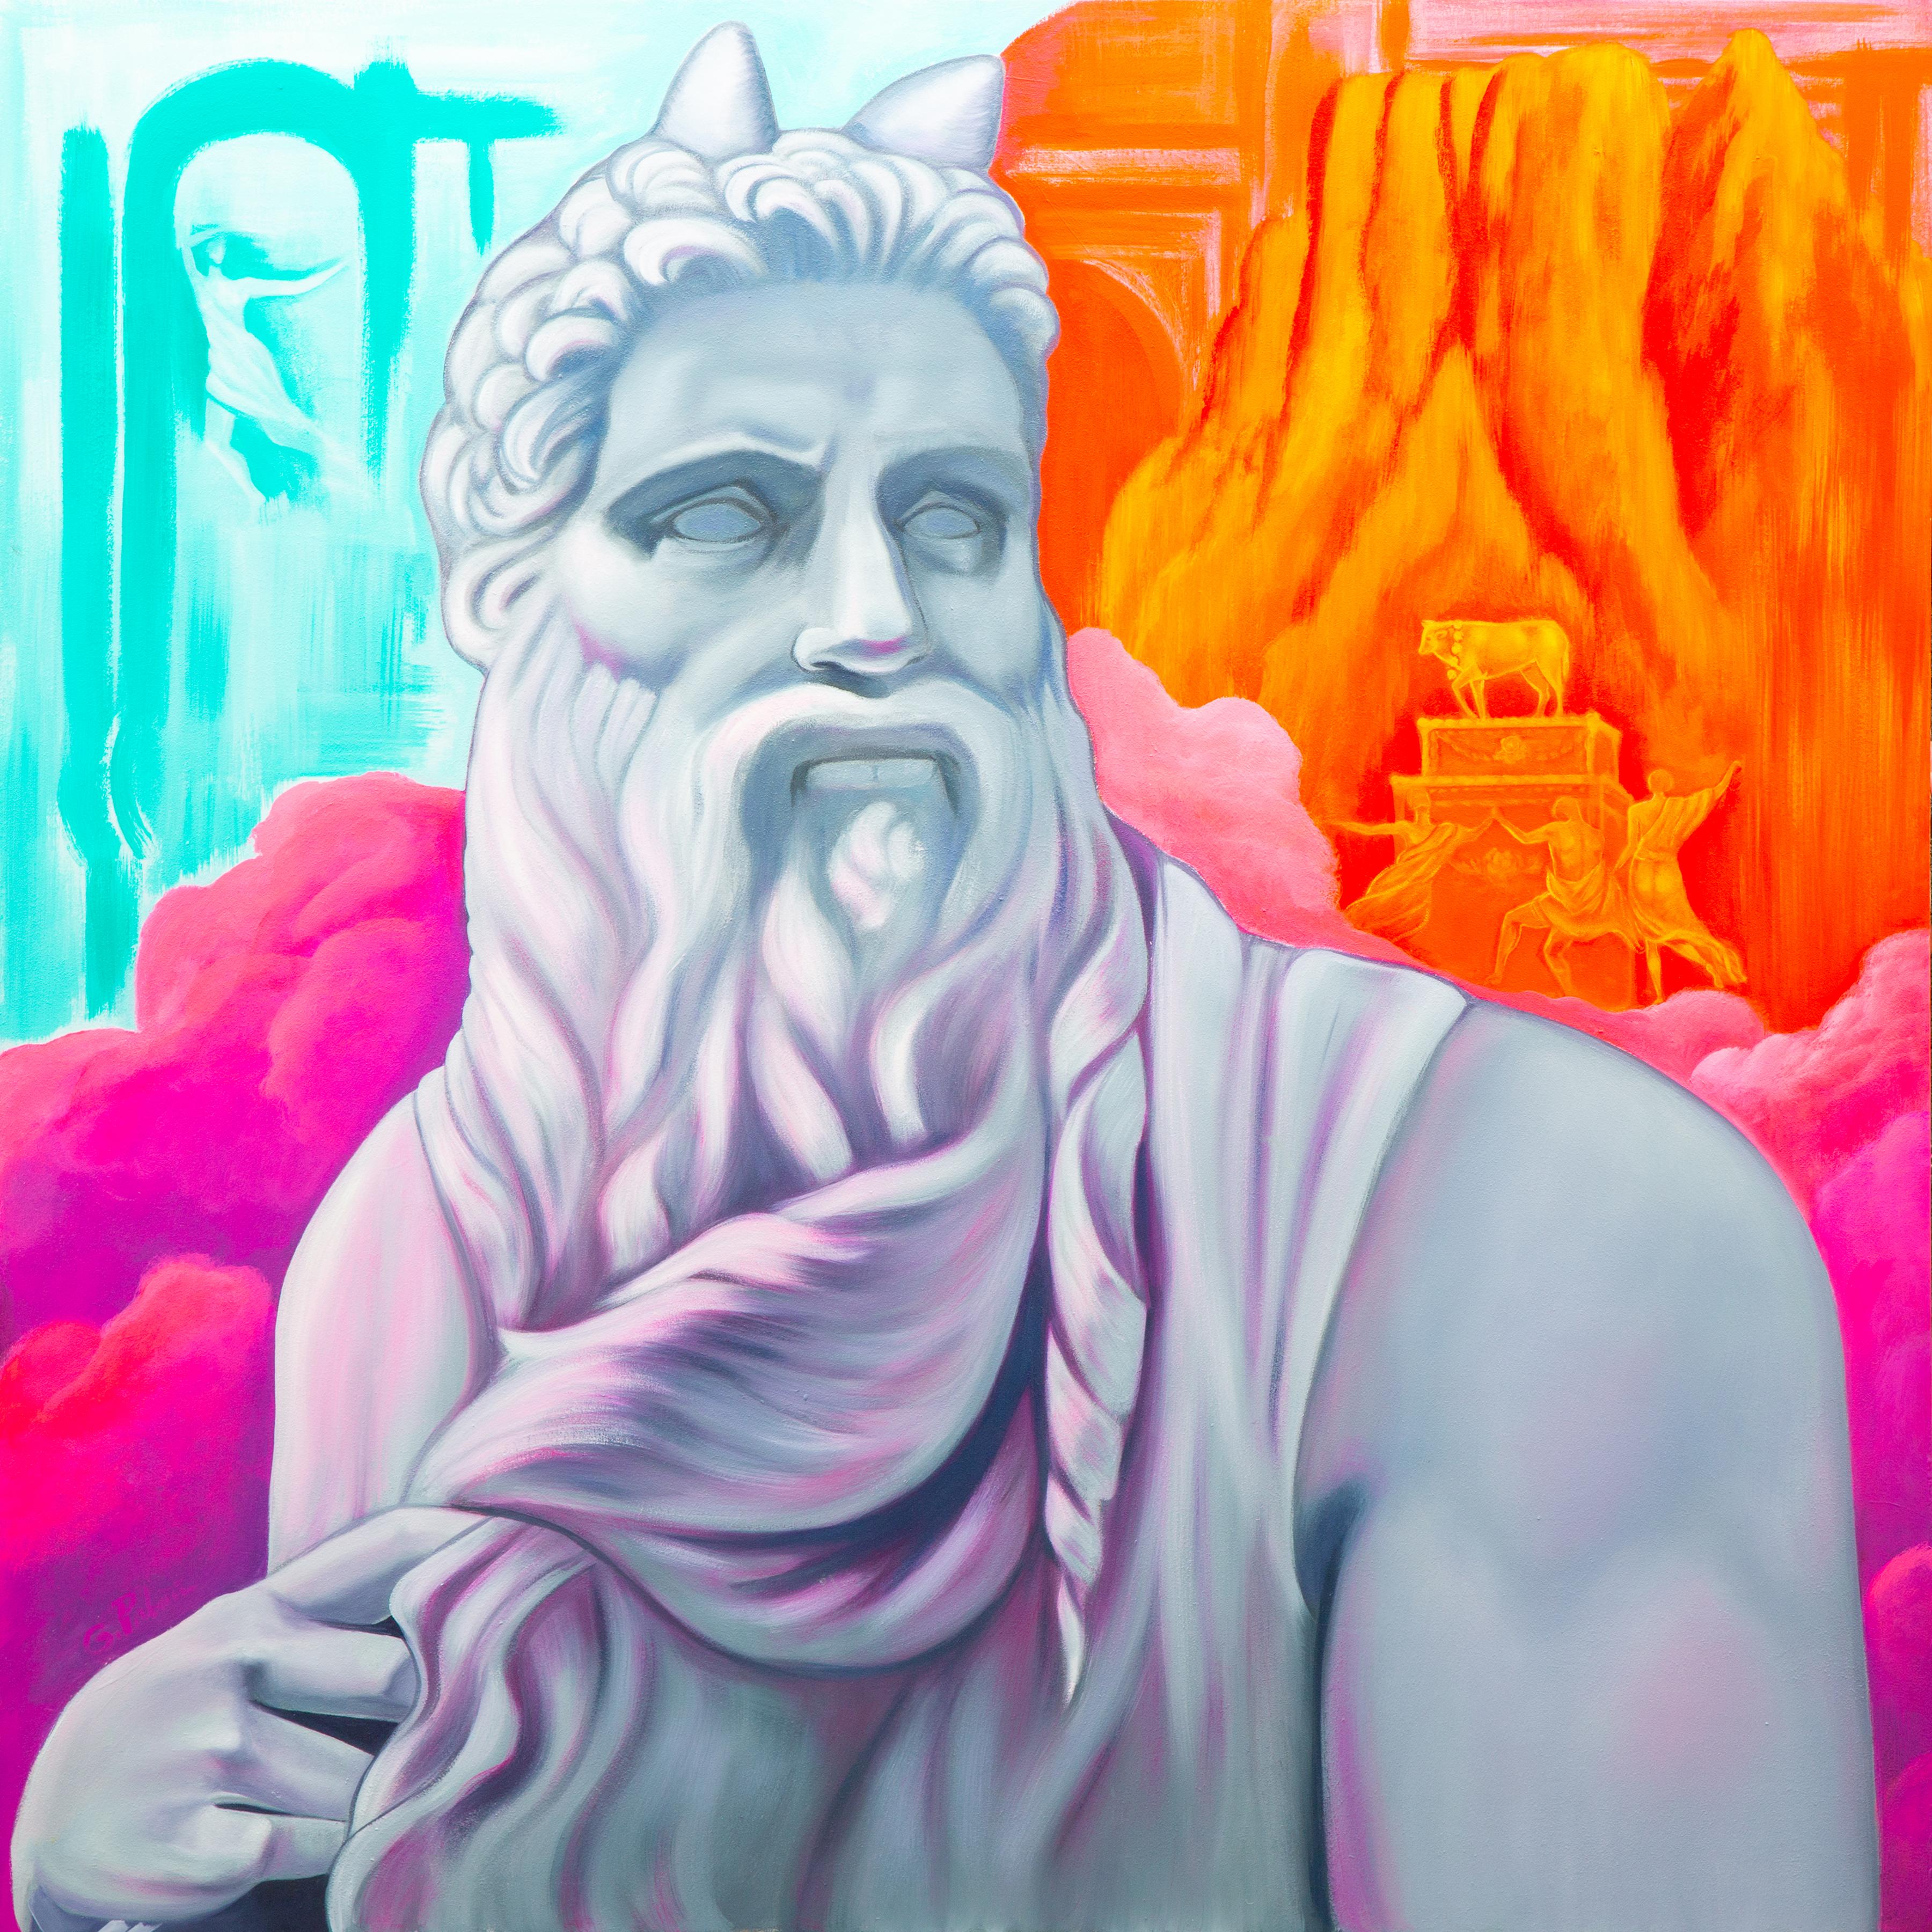 Gina Palmerin Figurative Painting - Colorful Biblical Portrait of Moses, "I Shall Not Obey"